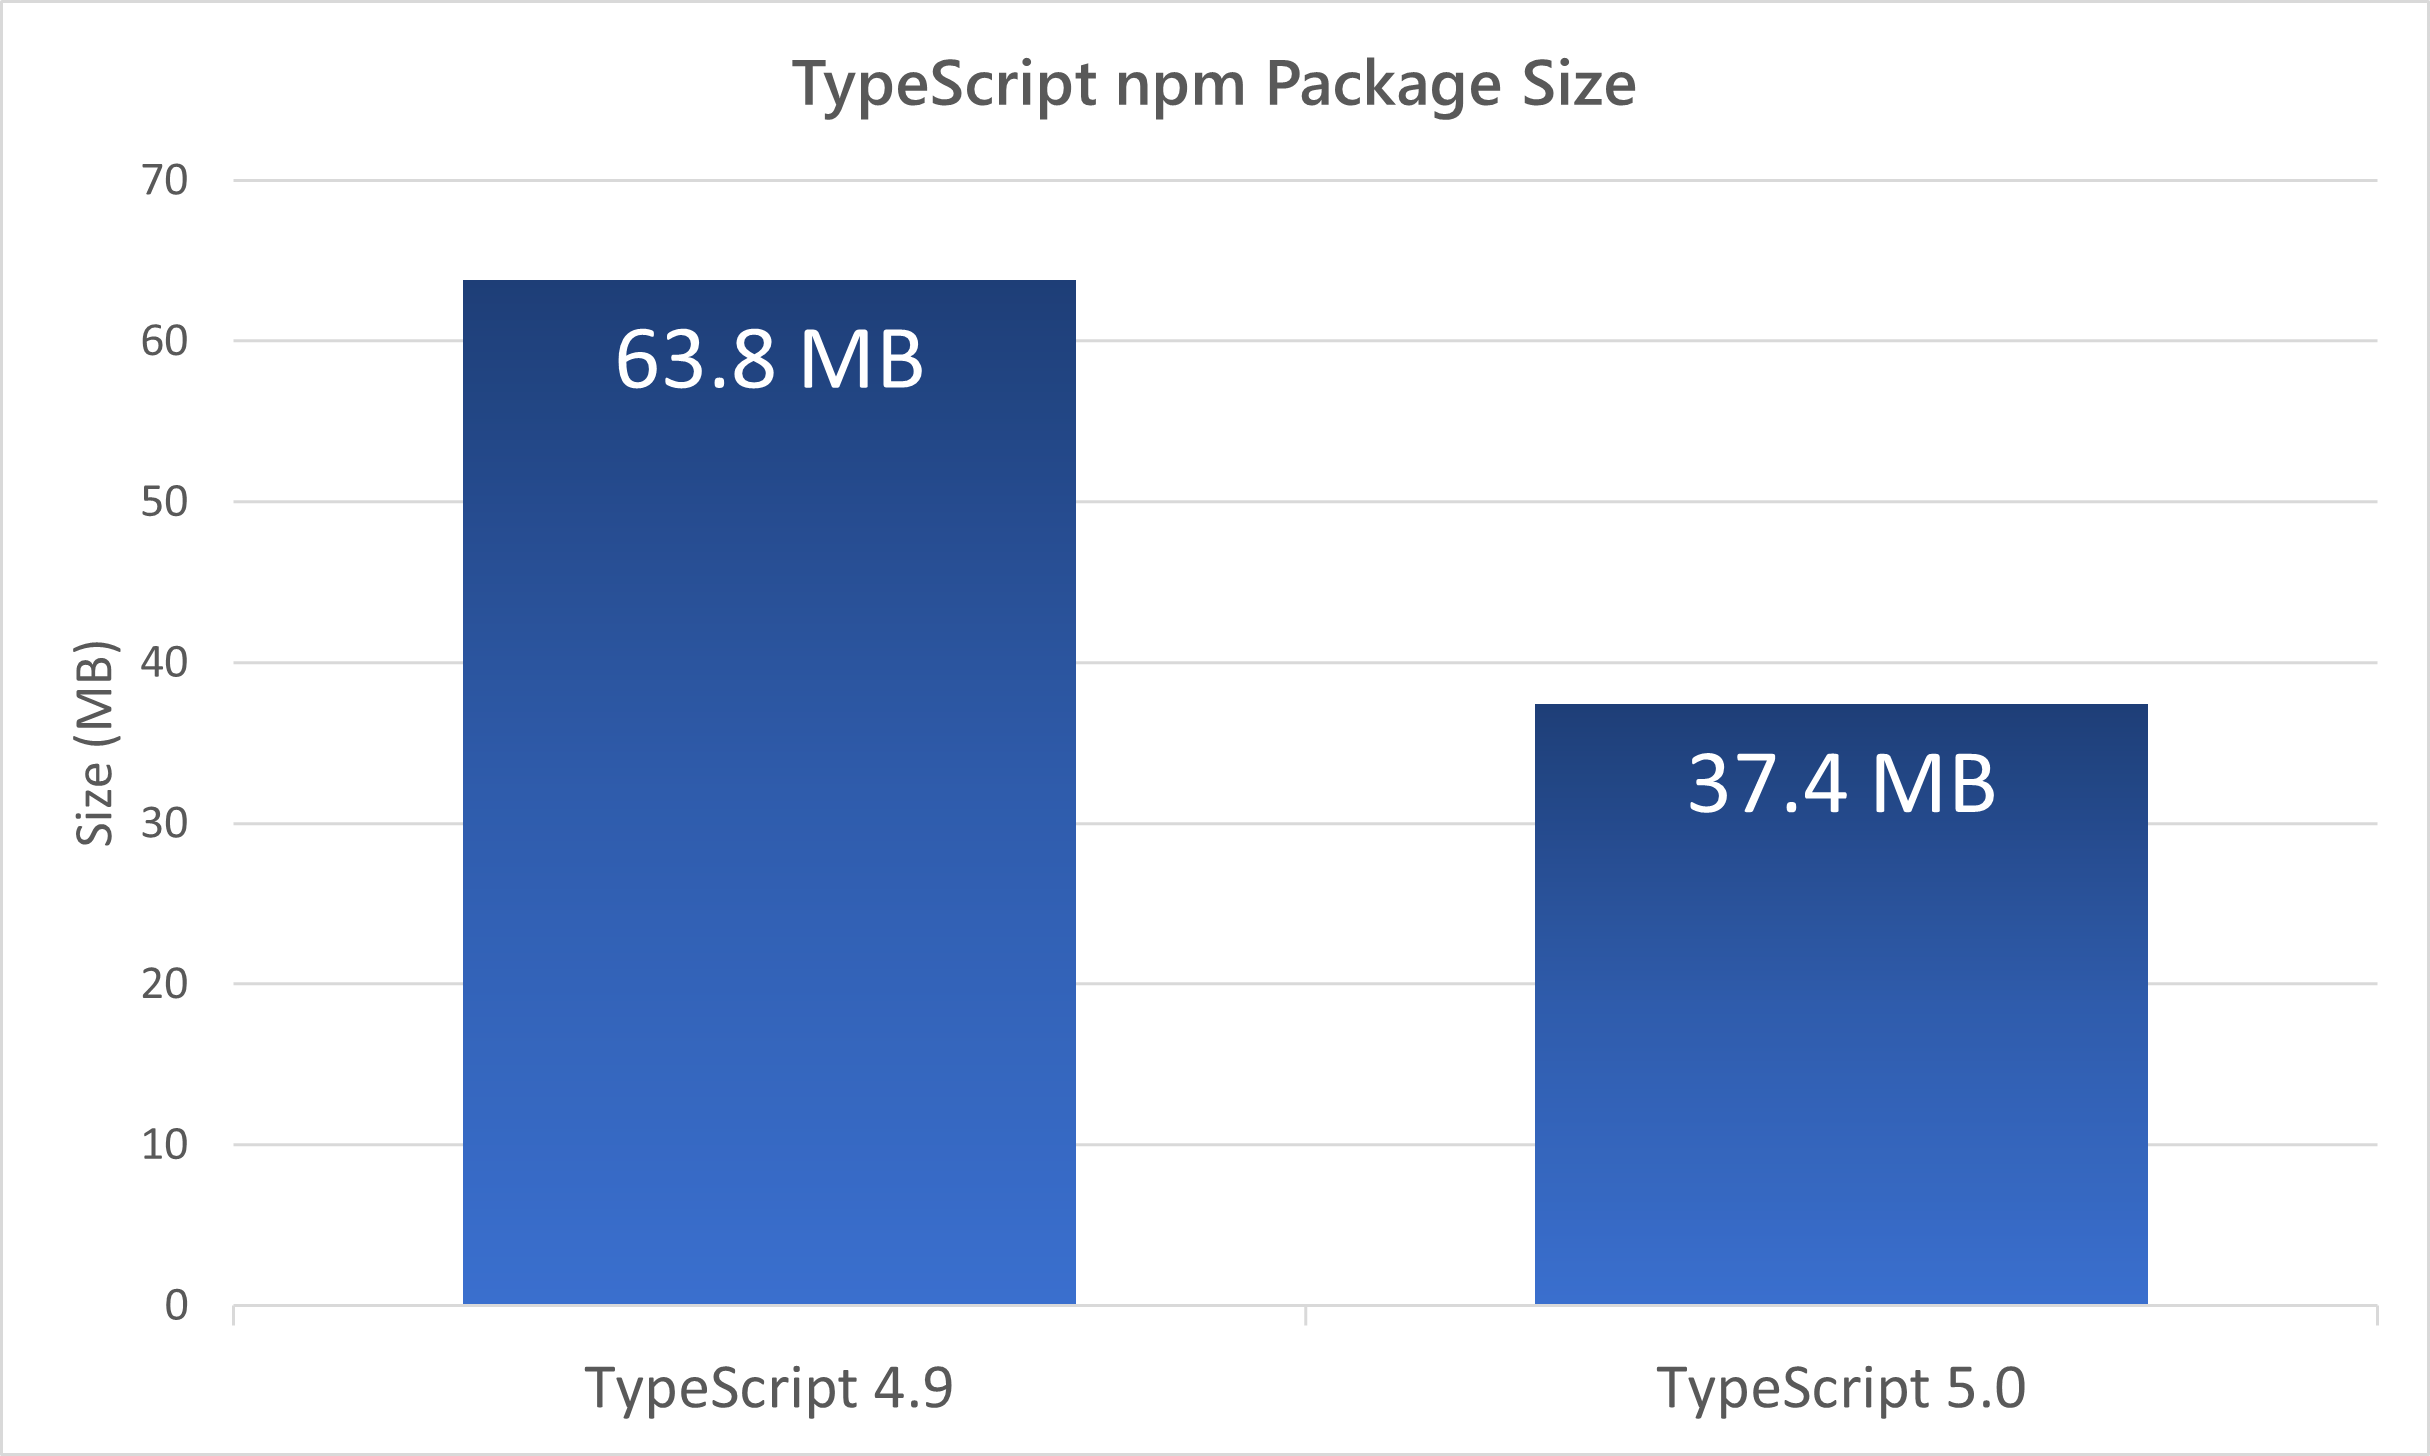 Chart of package size on npm between TypeScript 4.9 and 5.0. 4.9 package size is 63.8 MB, 5.0 package size is 37.4 MB.